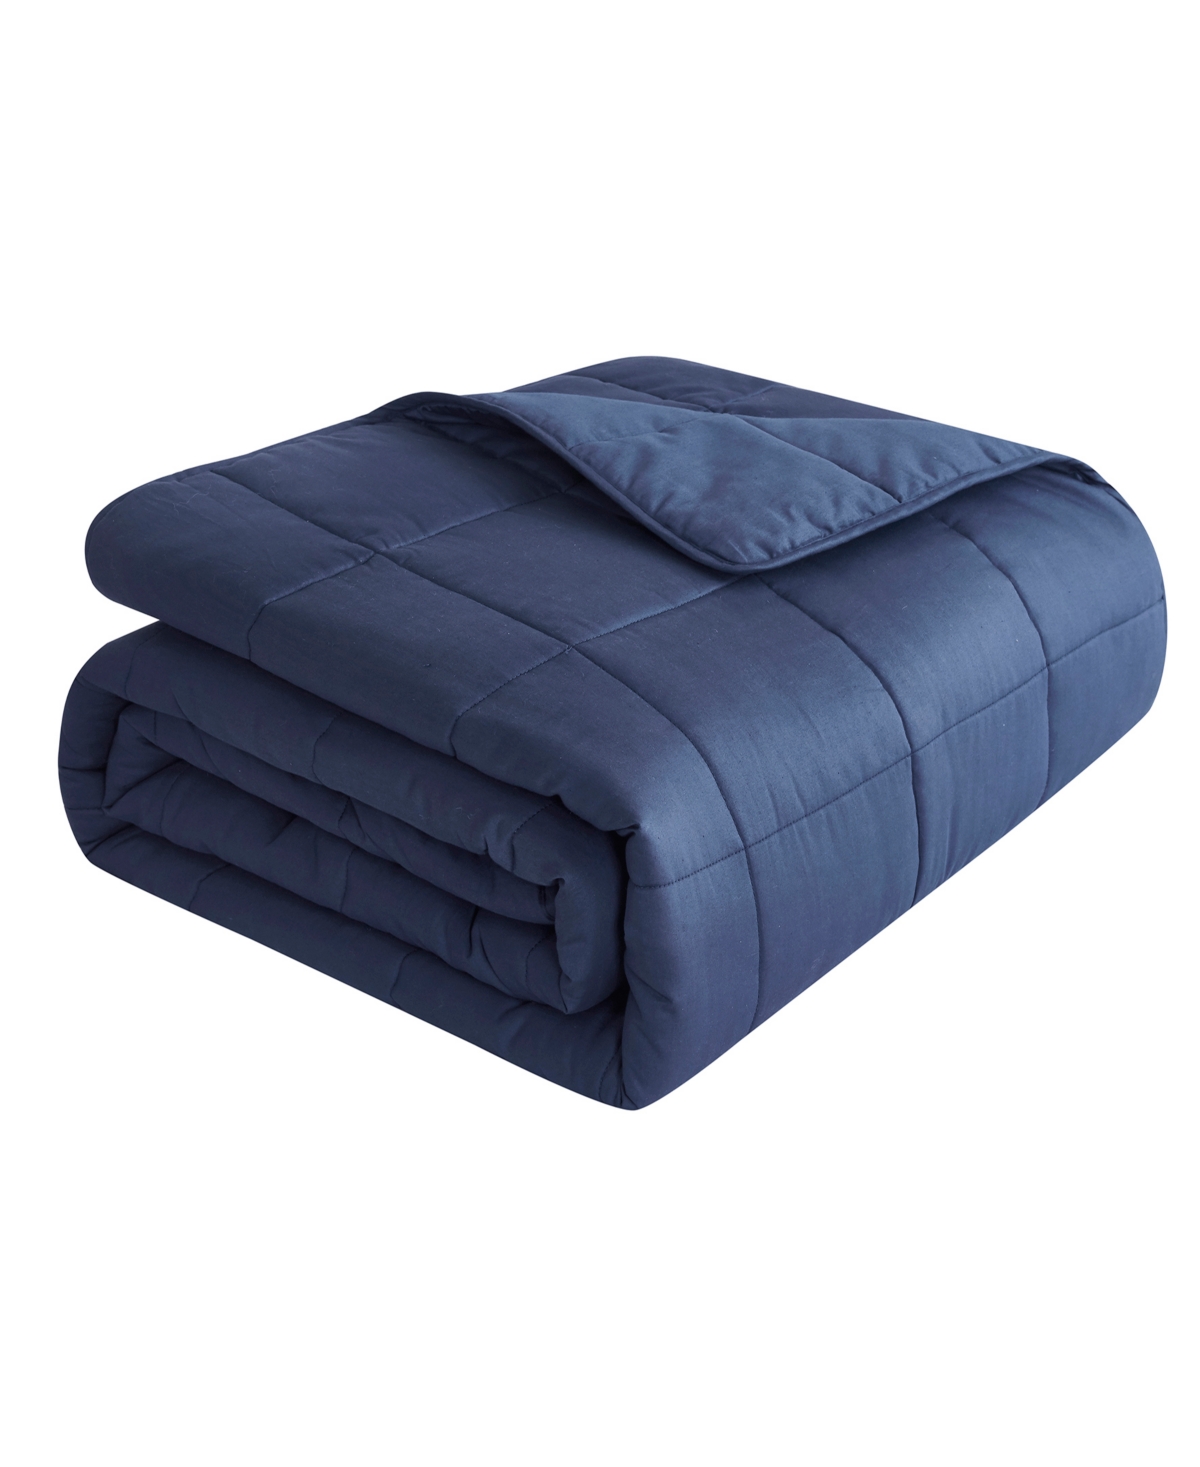 Dream Theory Cotton Weighted 20 Lbs Blanket, Full/queen In Navy